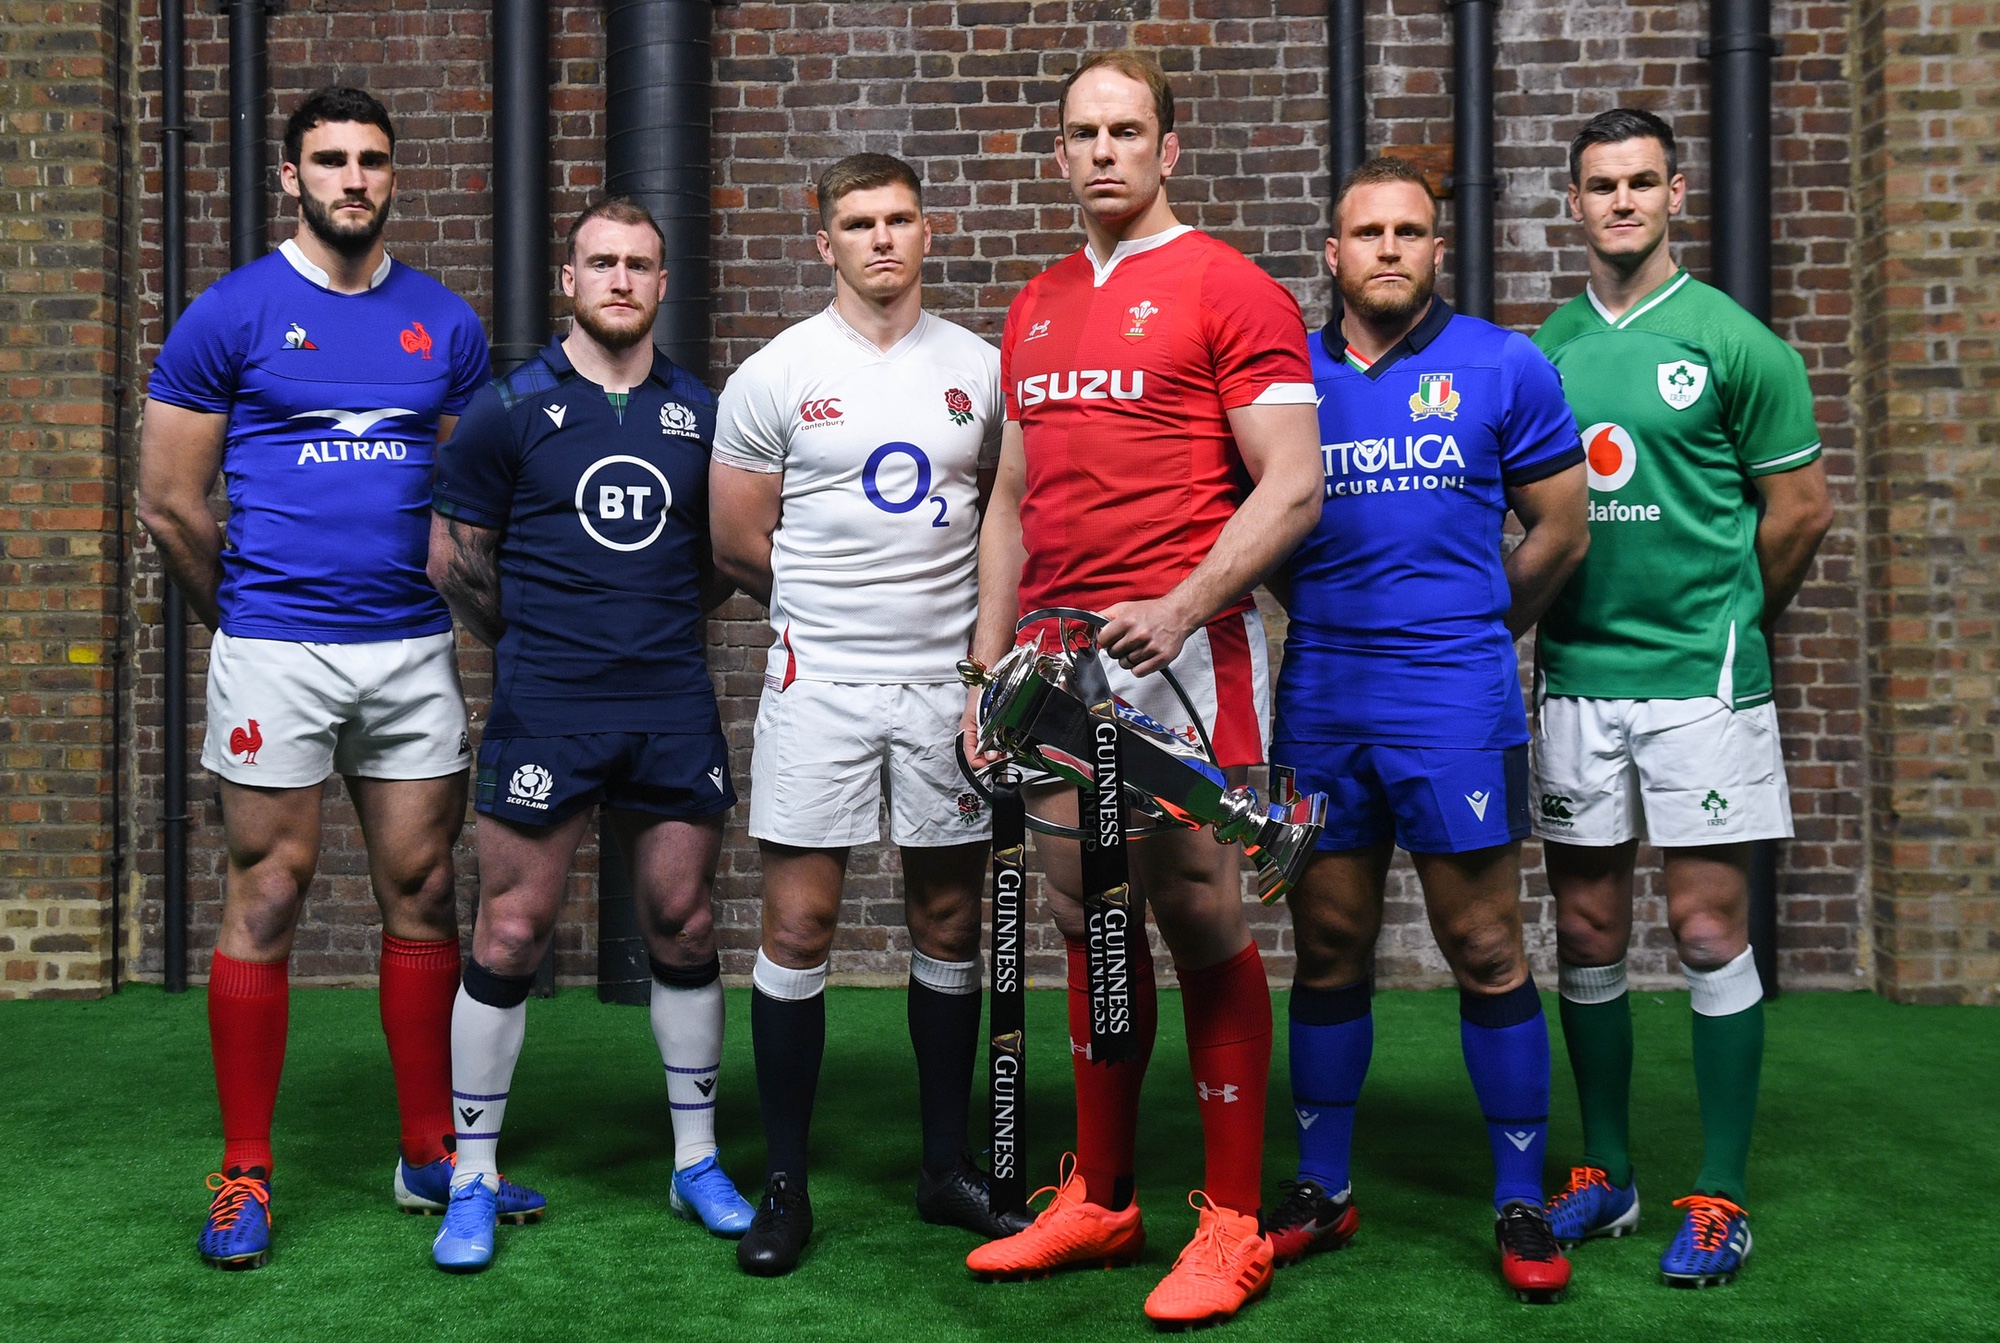 borno six nations rugby 2020 live